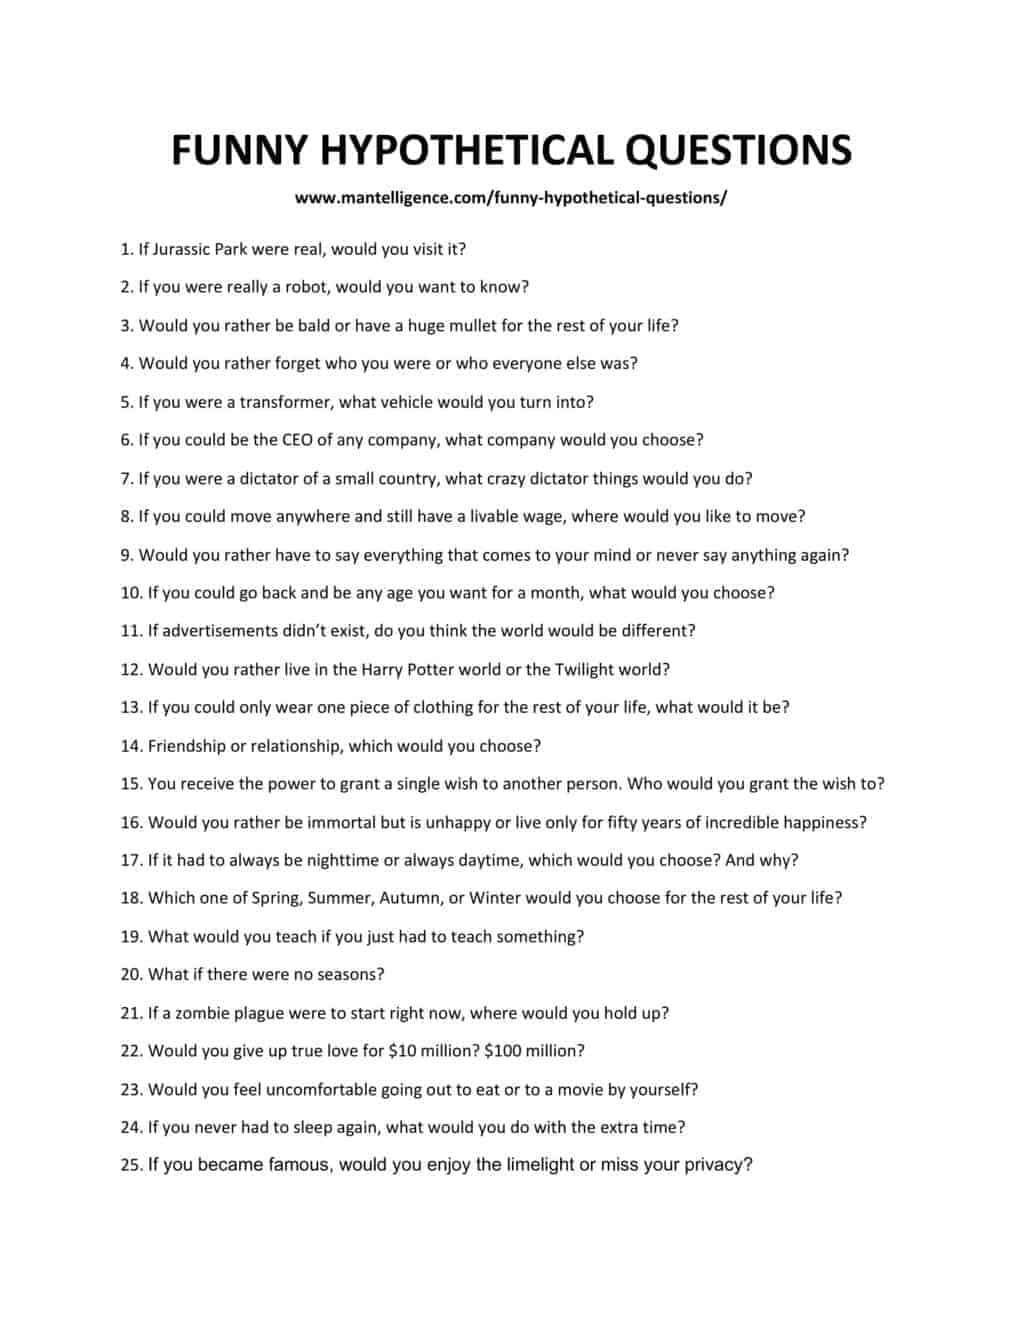 FUNNY HYPOTHETICAL QUESTIONS (1)-1 (1)